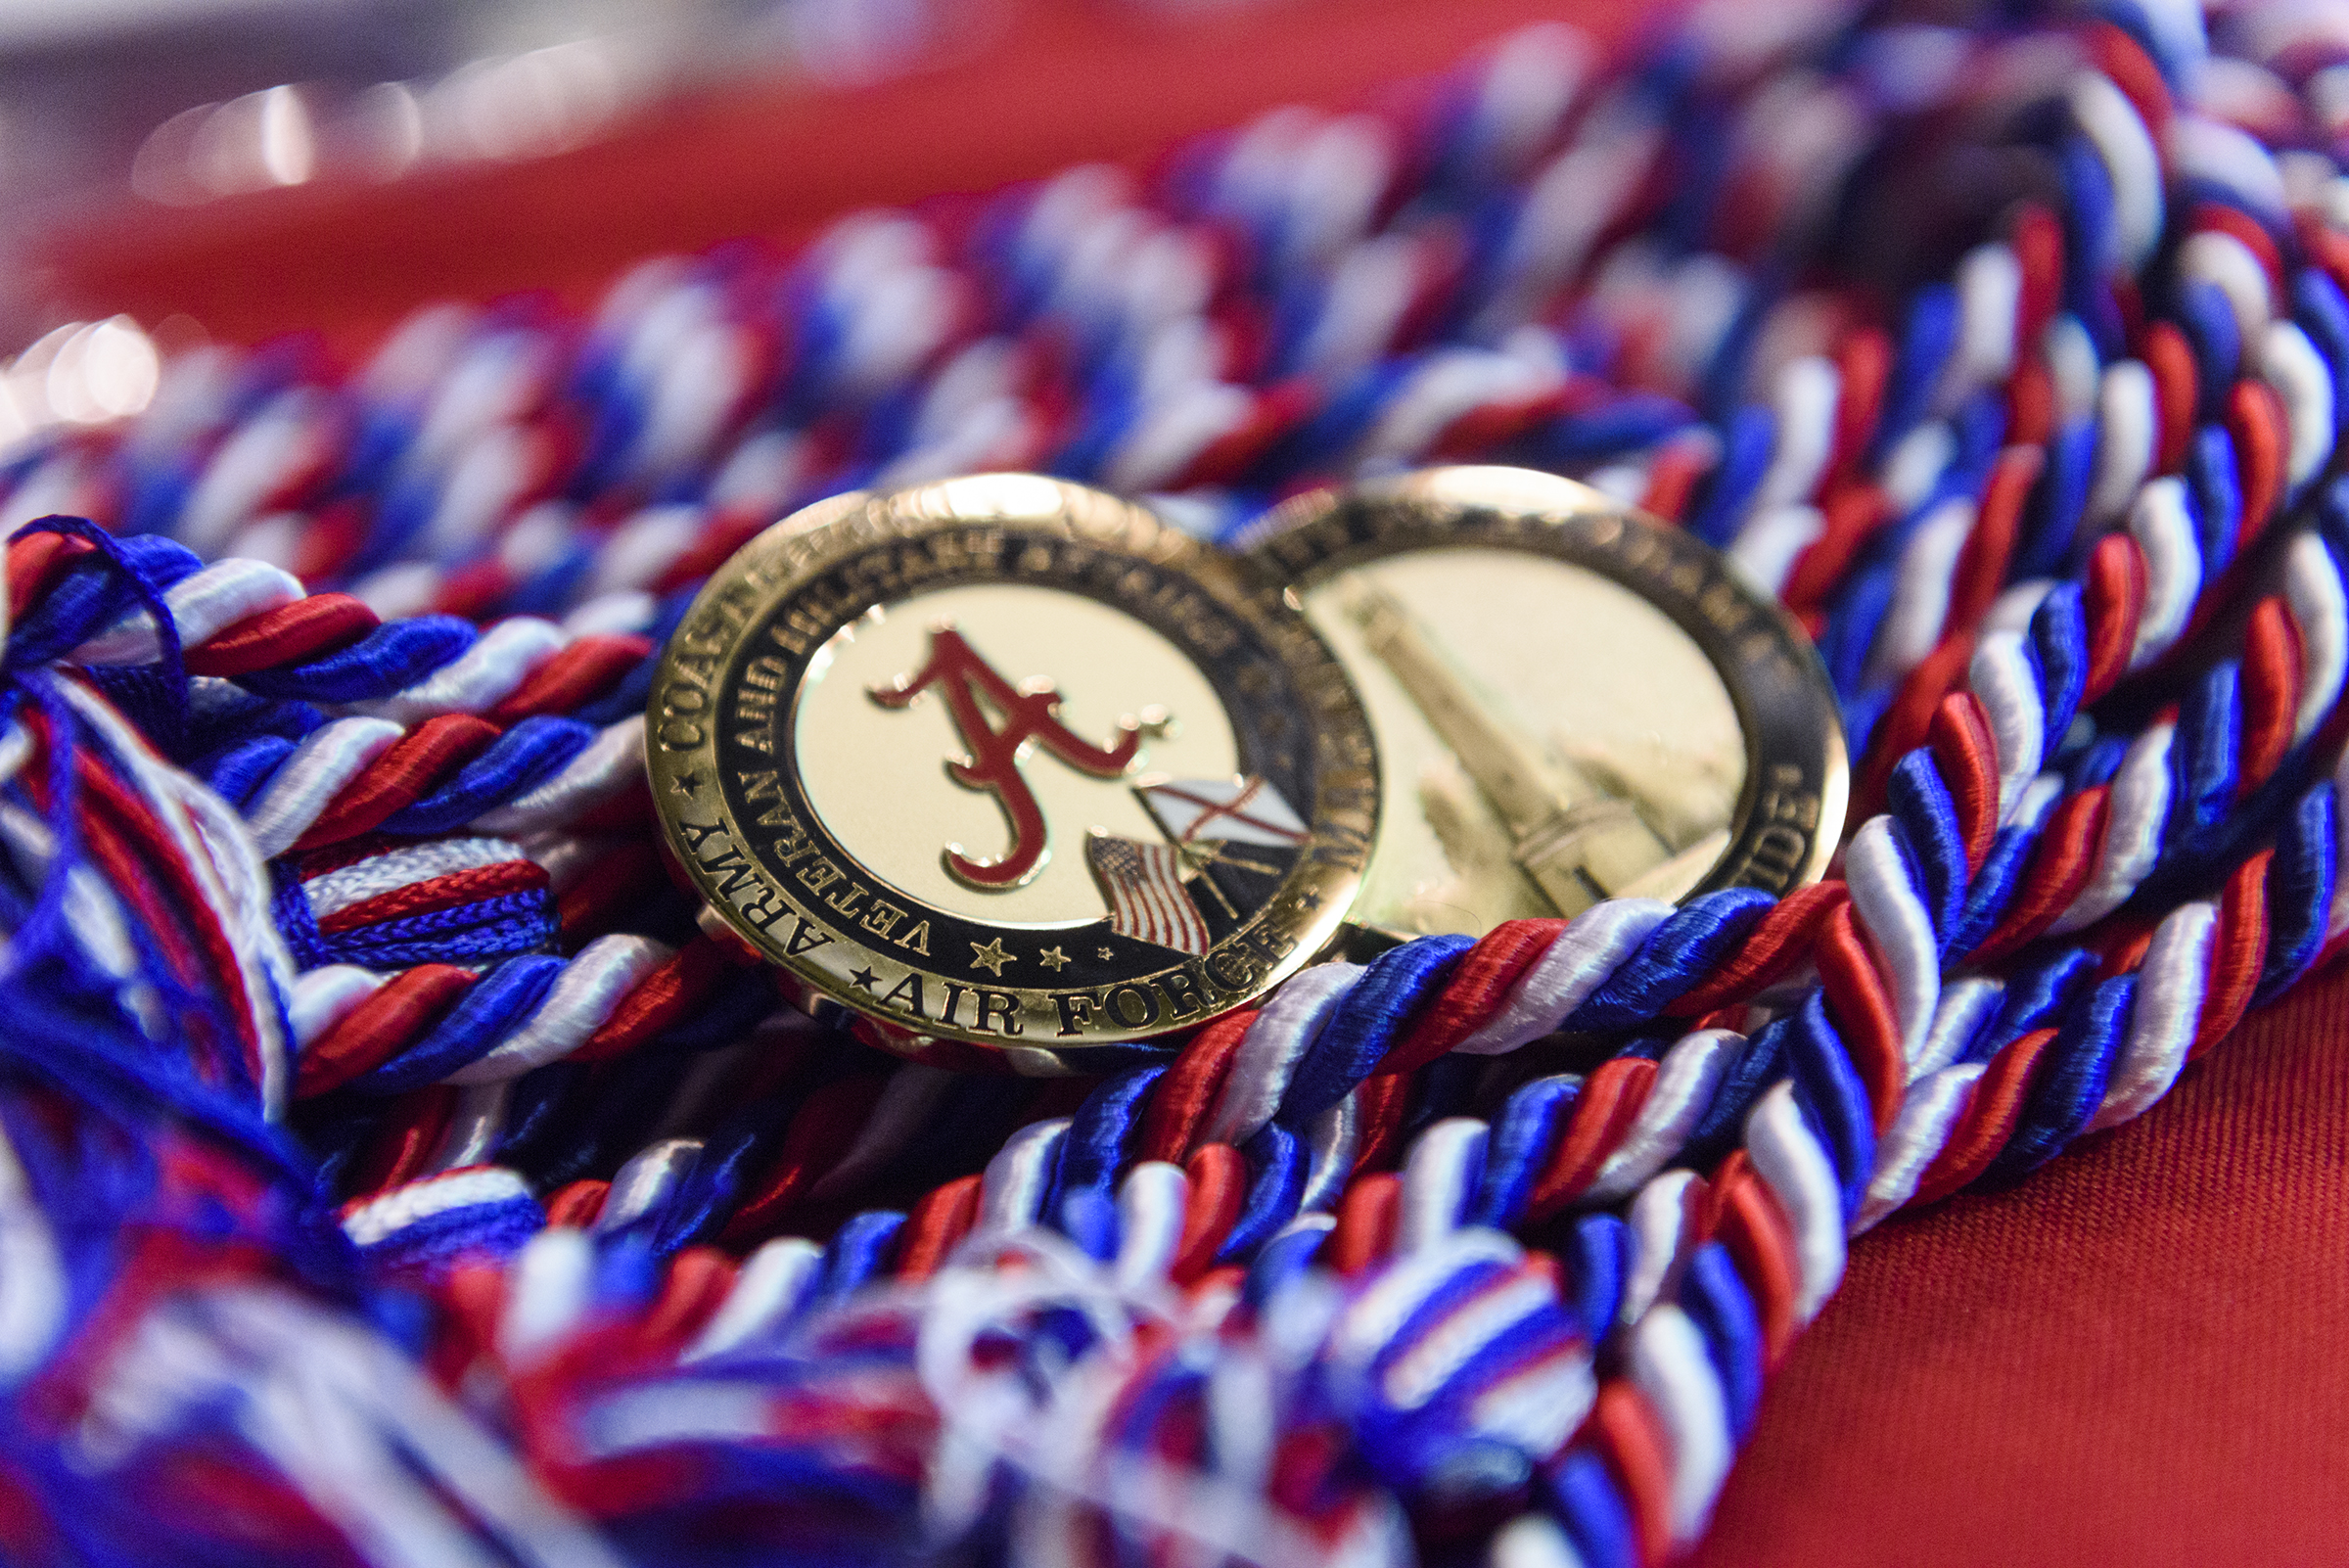 UA Student Veterans Receive Honors Cords, ‘Challenge Coins’